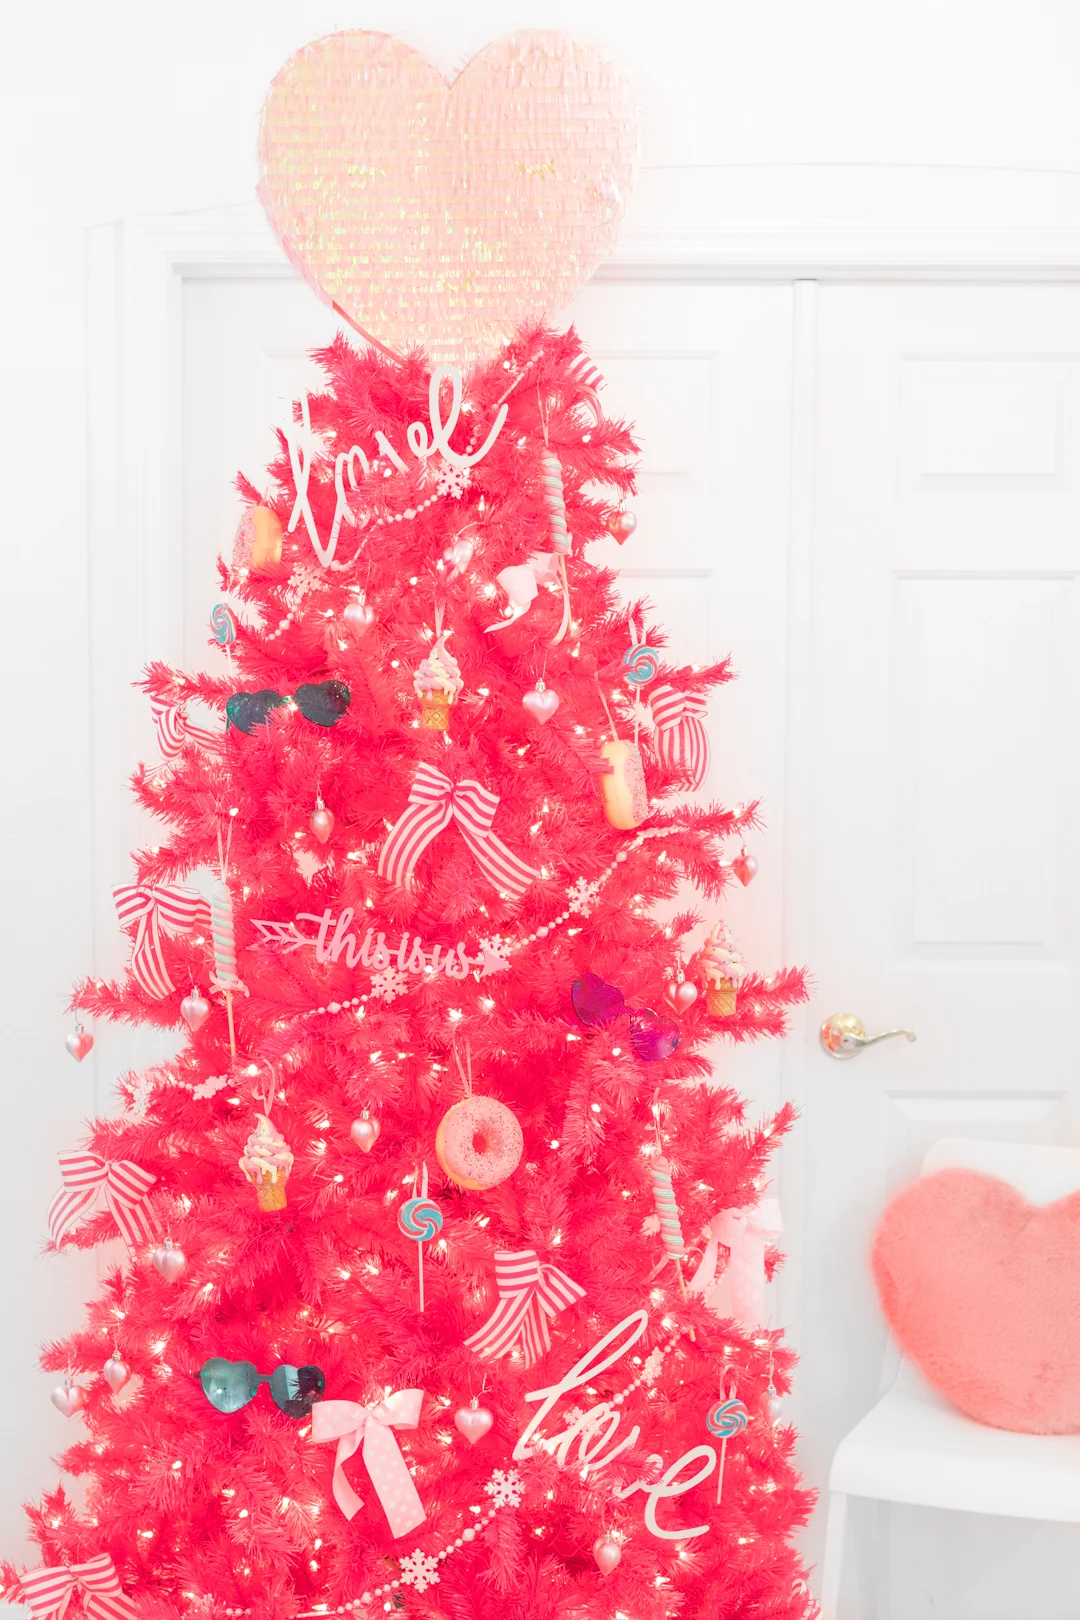 12 Best Valentine Trees - DIY Valentine's Day Trees and Decorations